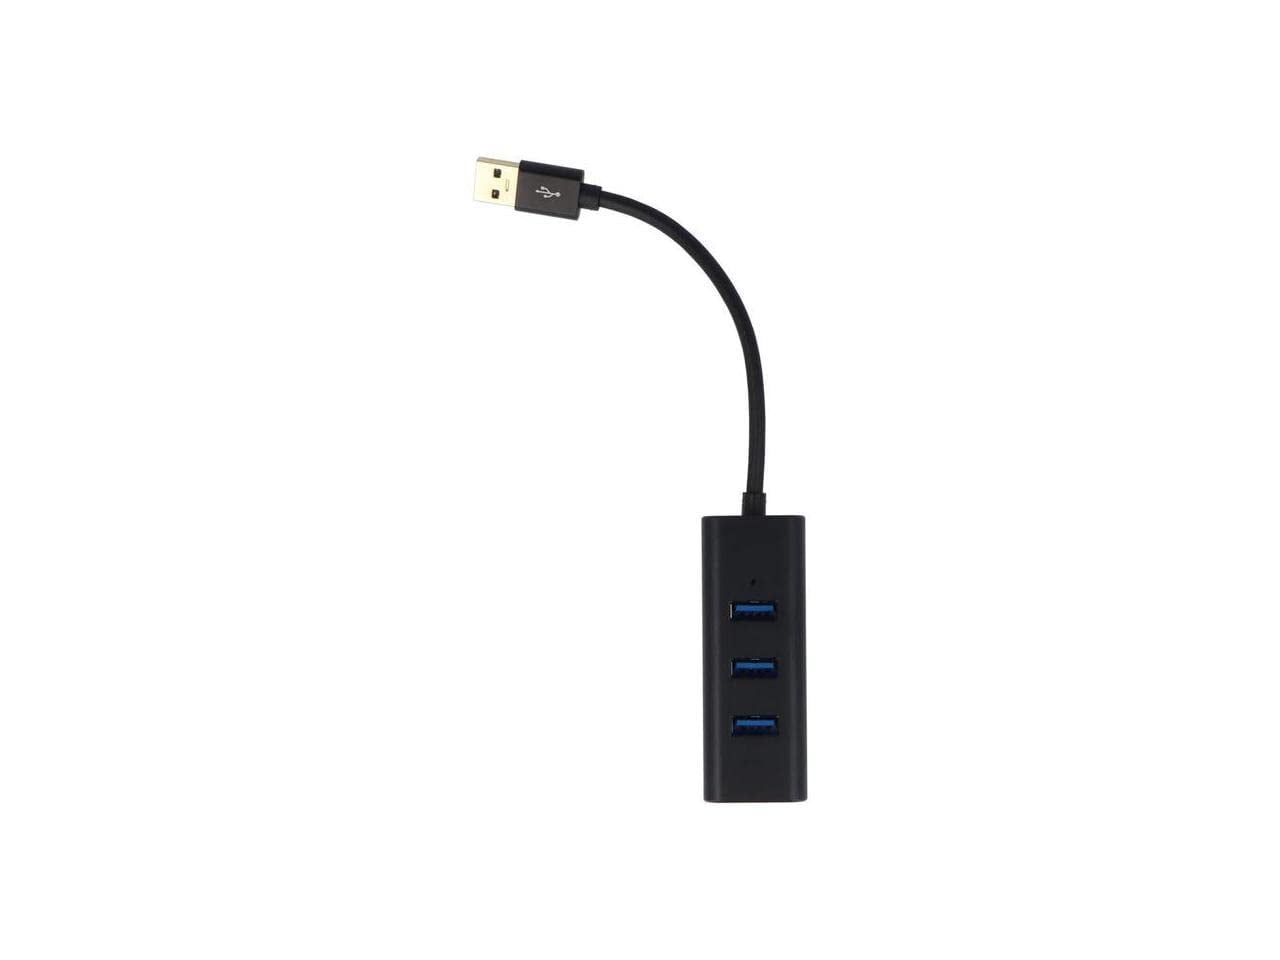 Picture of Visiontek 901437 USB 3 4 Port USB-A HUB Adapter